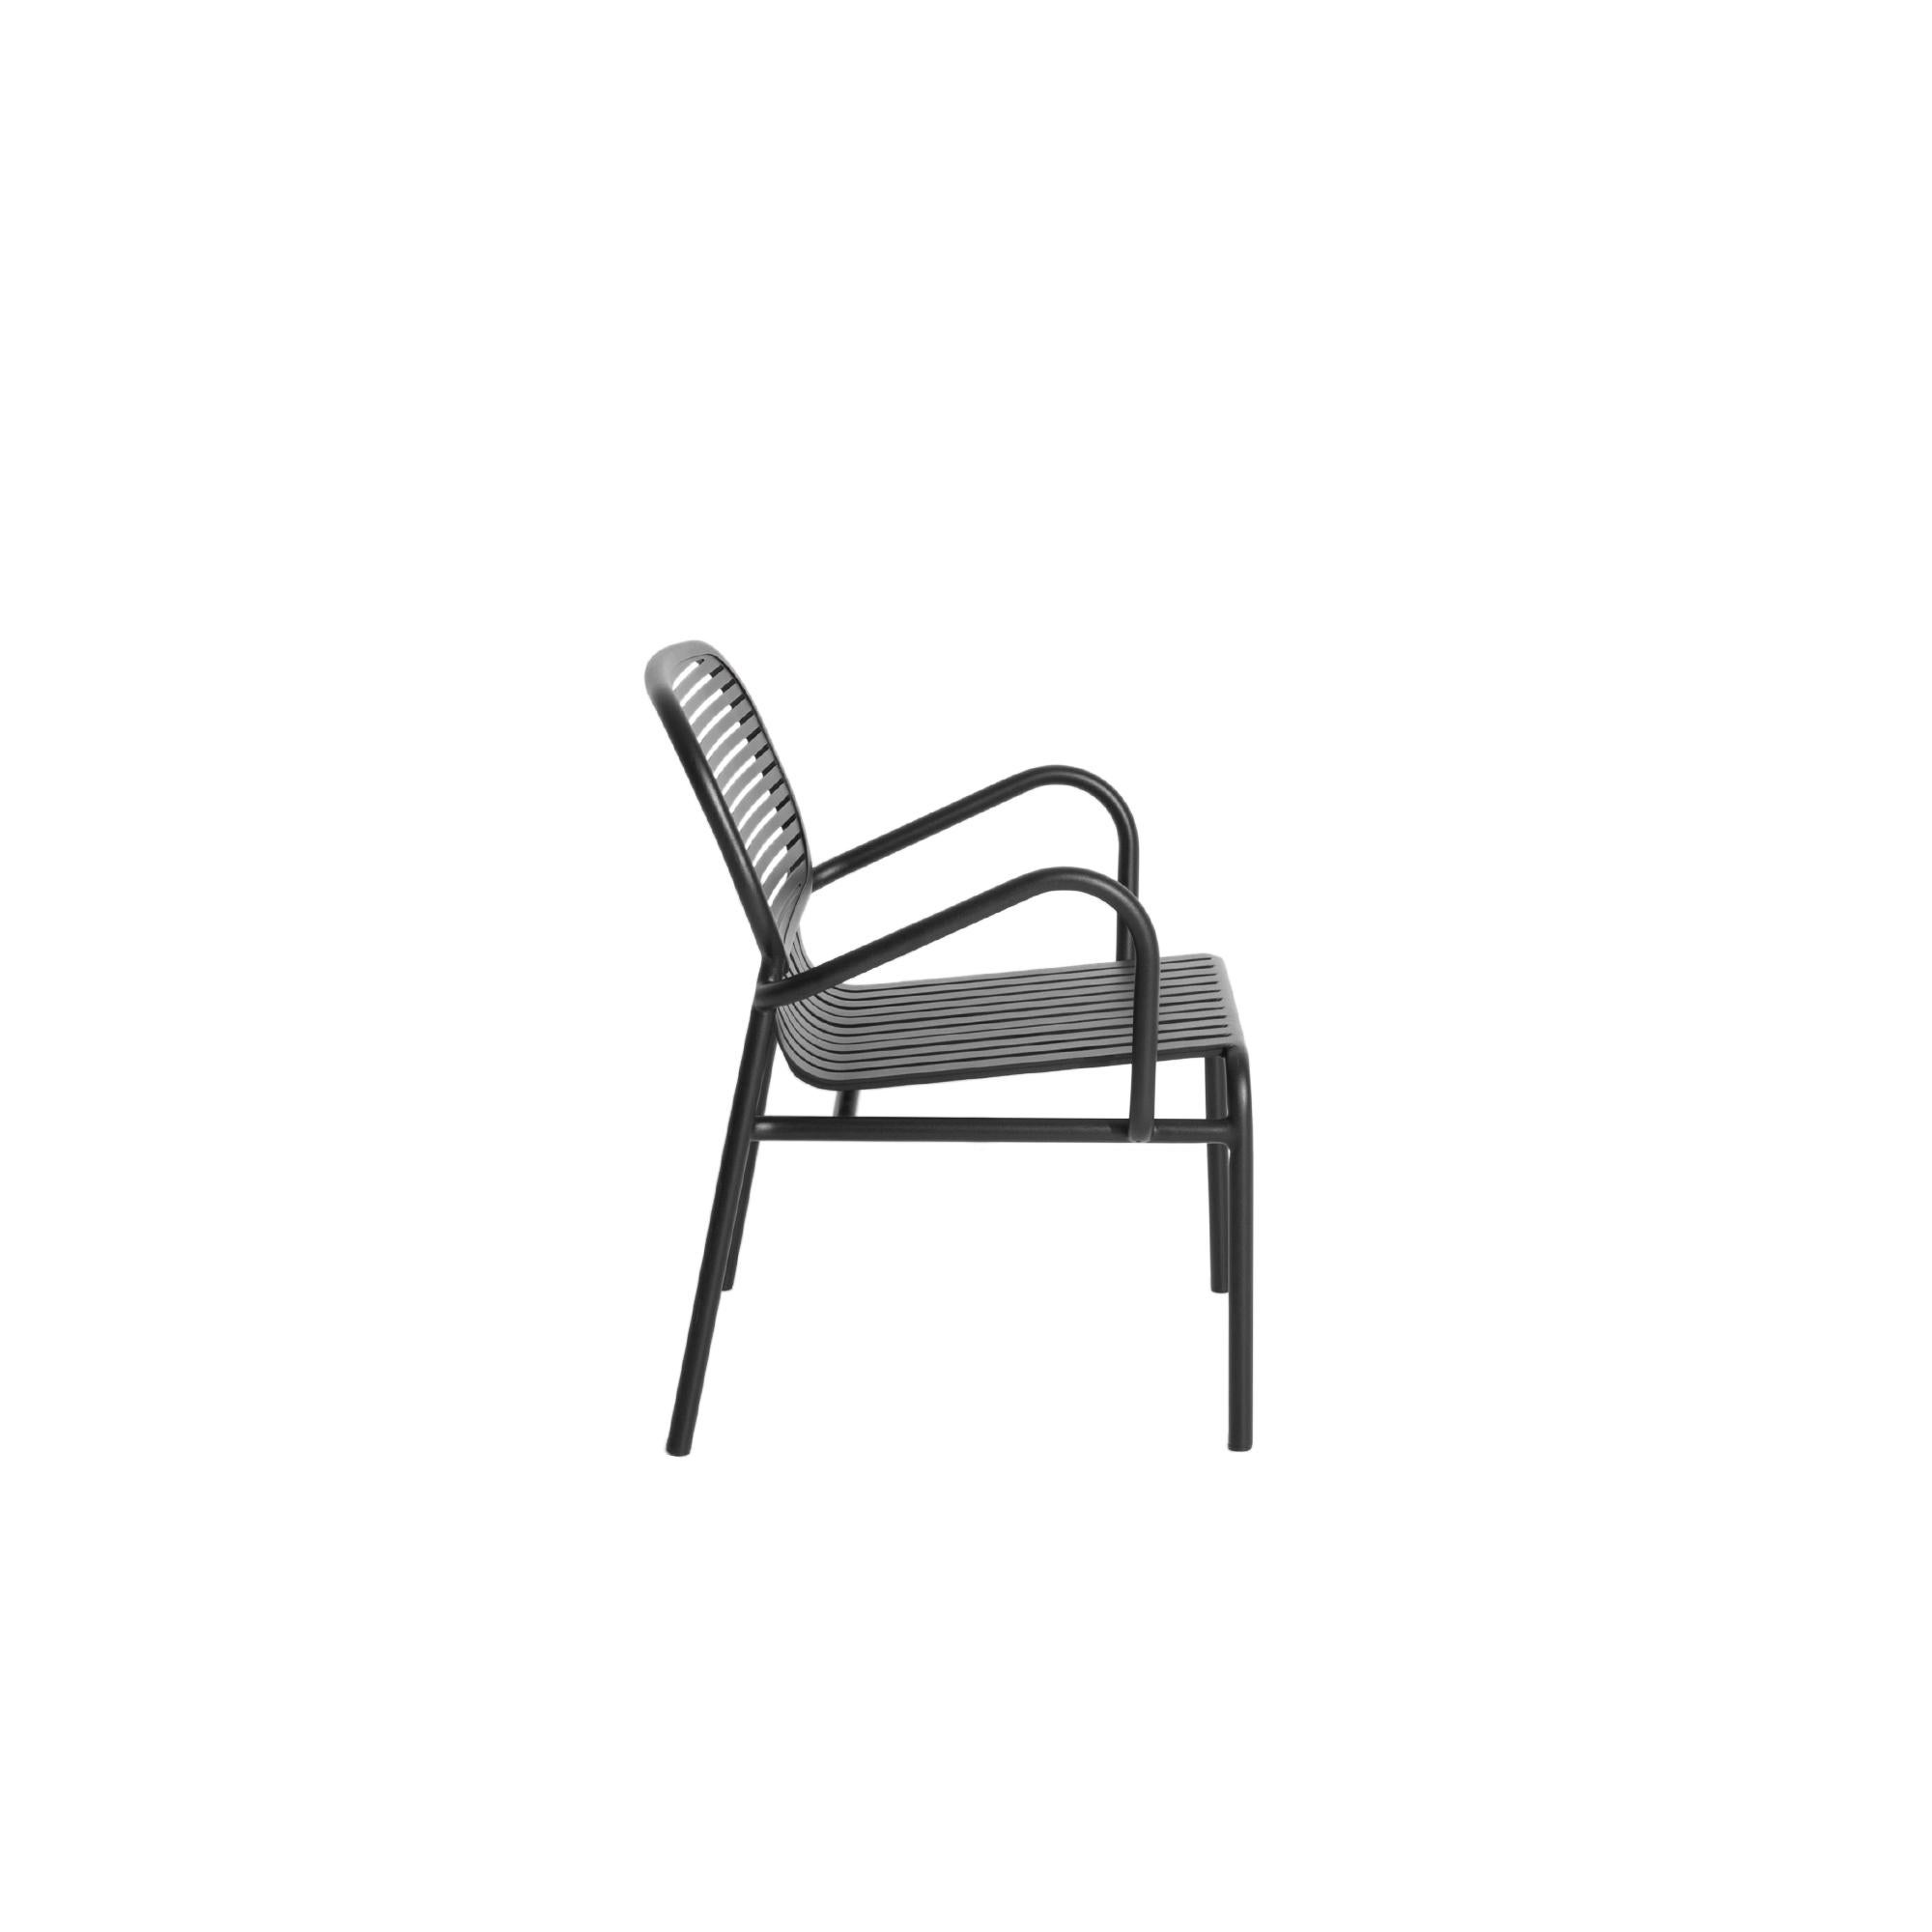 Chinese Petite Friture Week-End Armchair in Black Aluminium by Studio BrichetZiegler For Sale